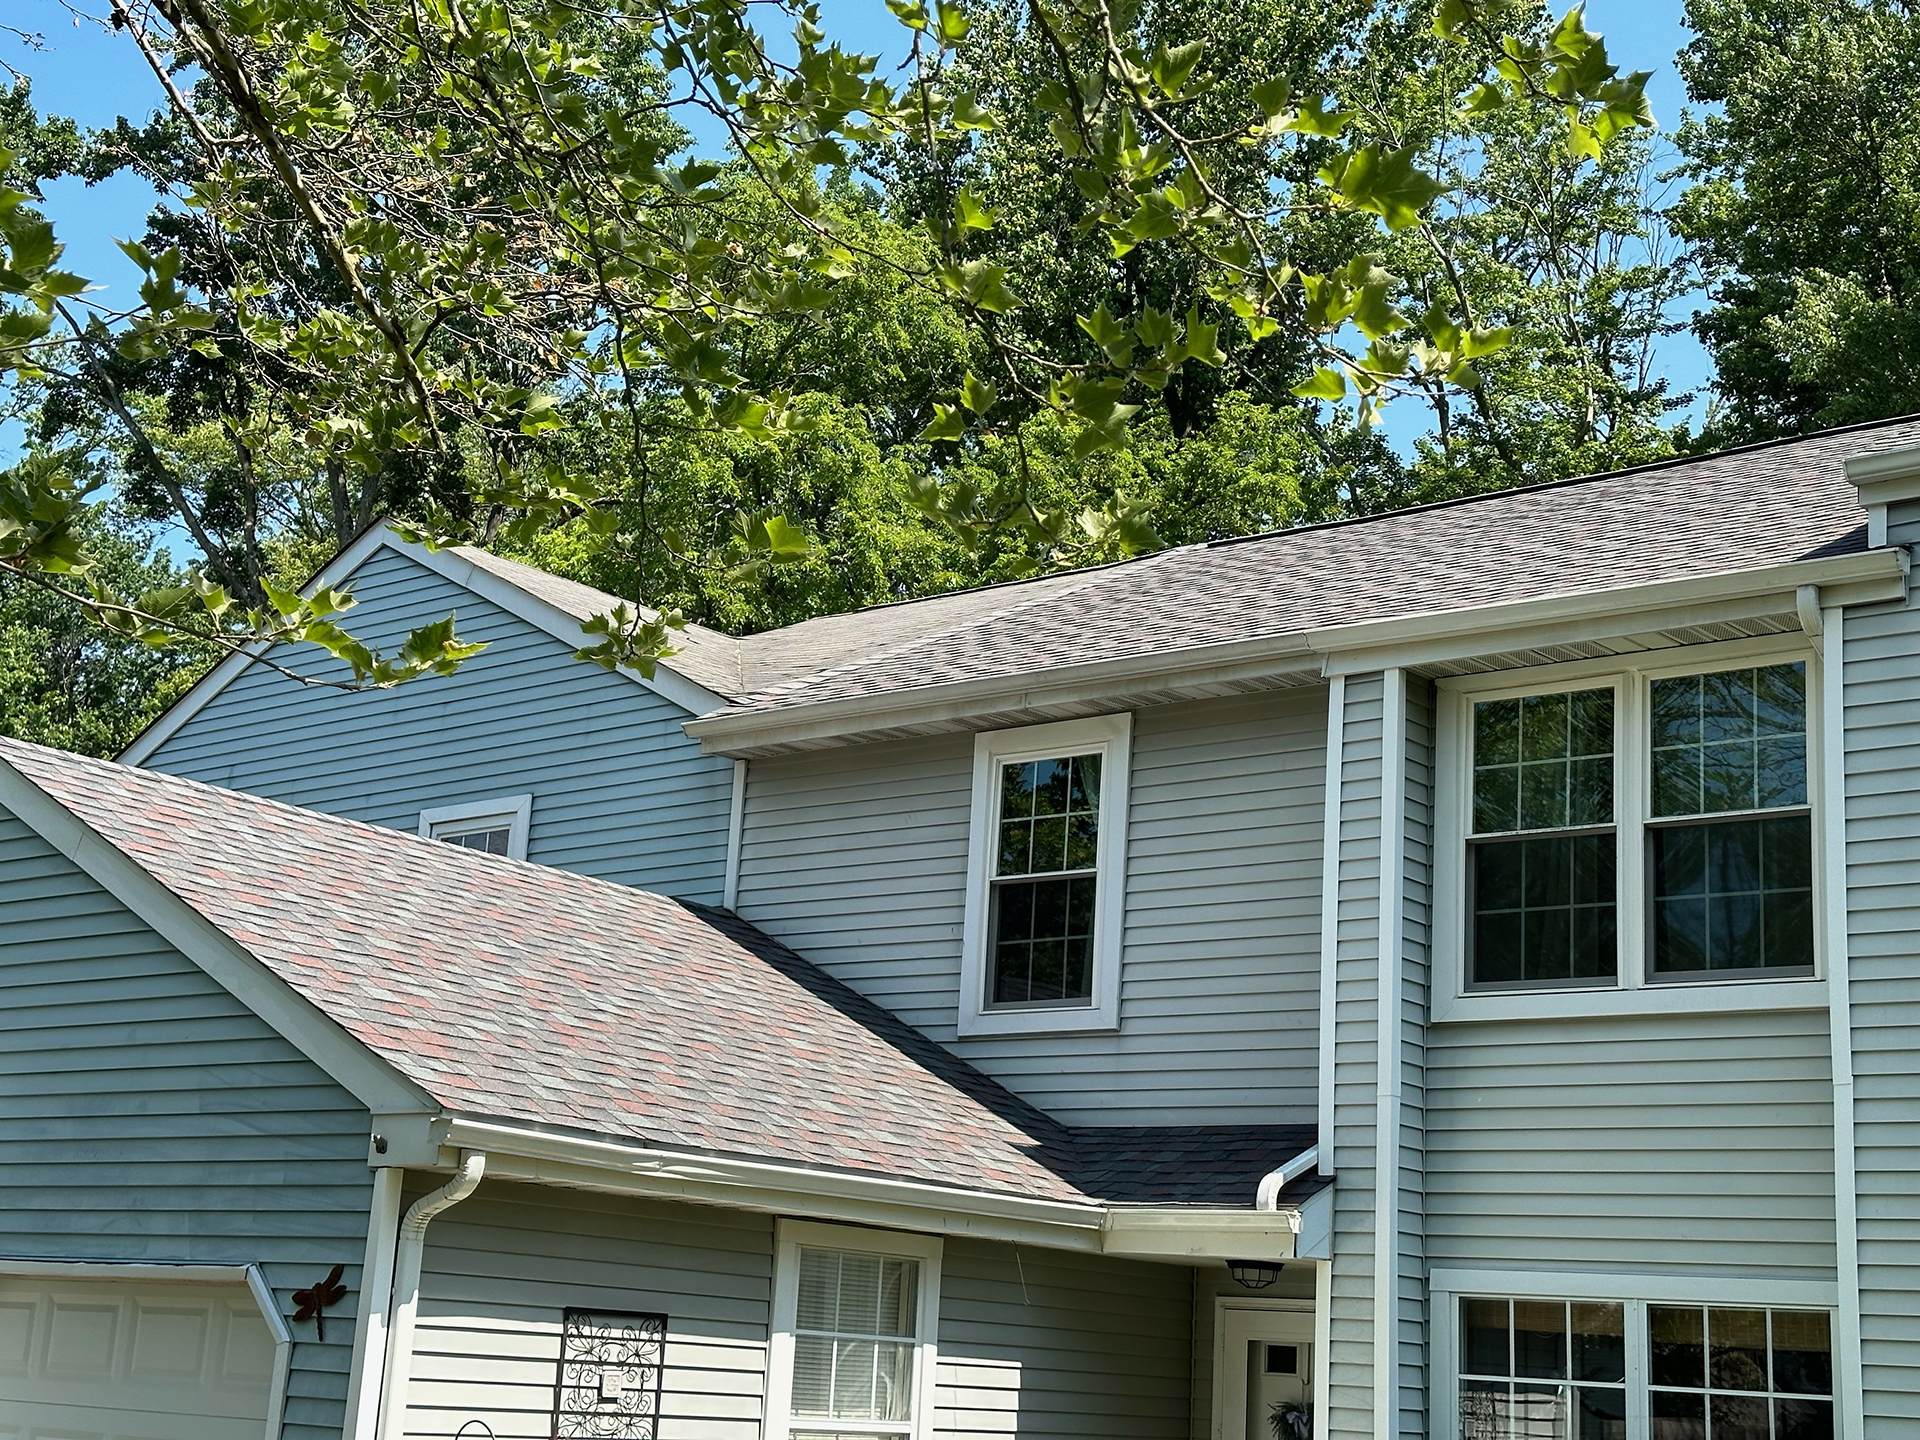 Blue home in Doylestown, PA after roof replacement in Bucks County, PA.